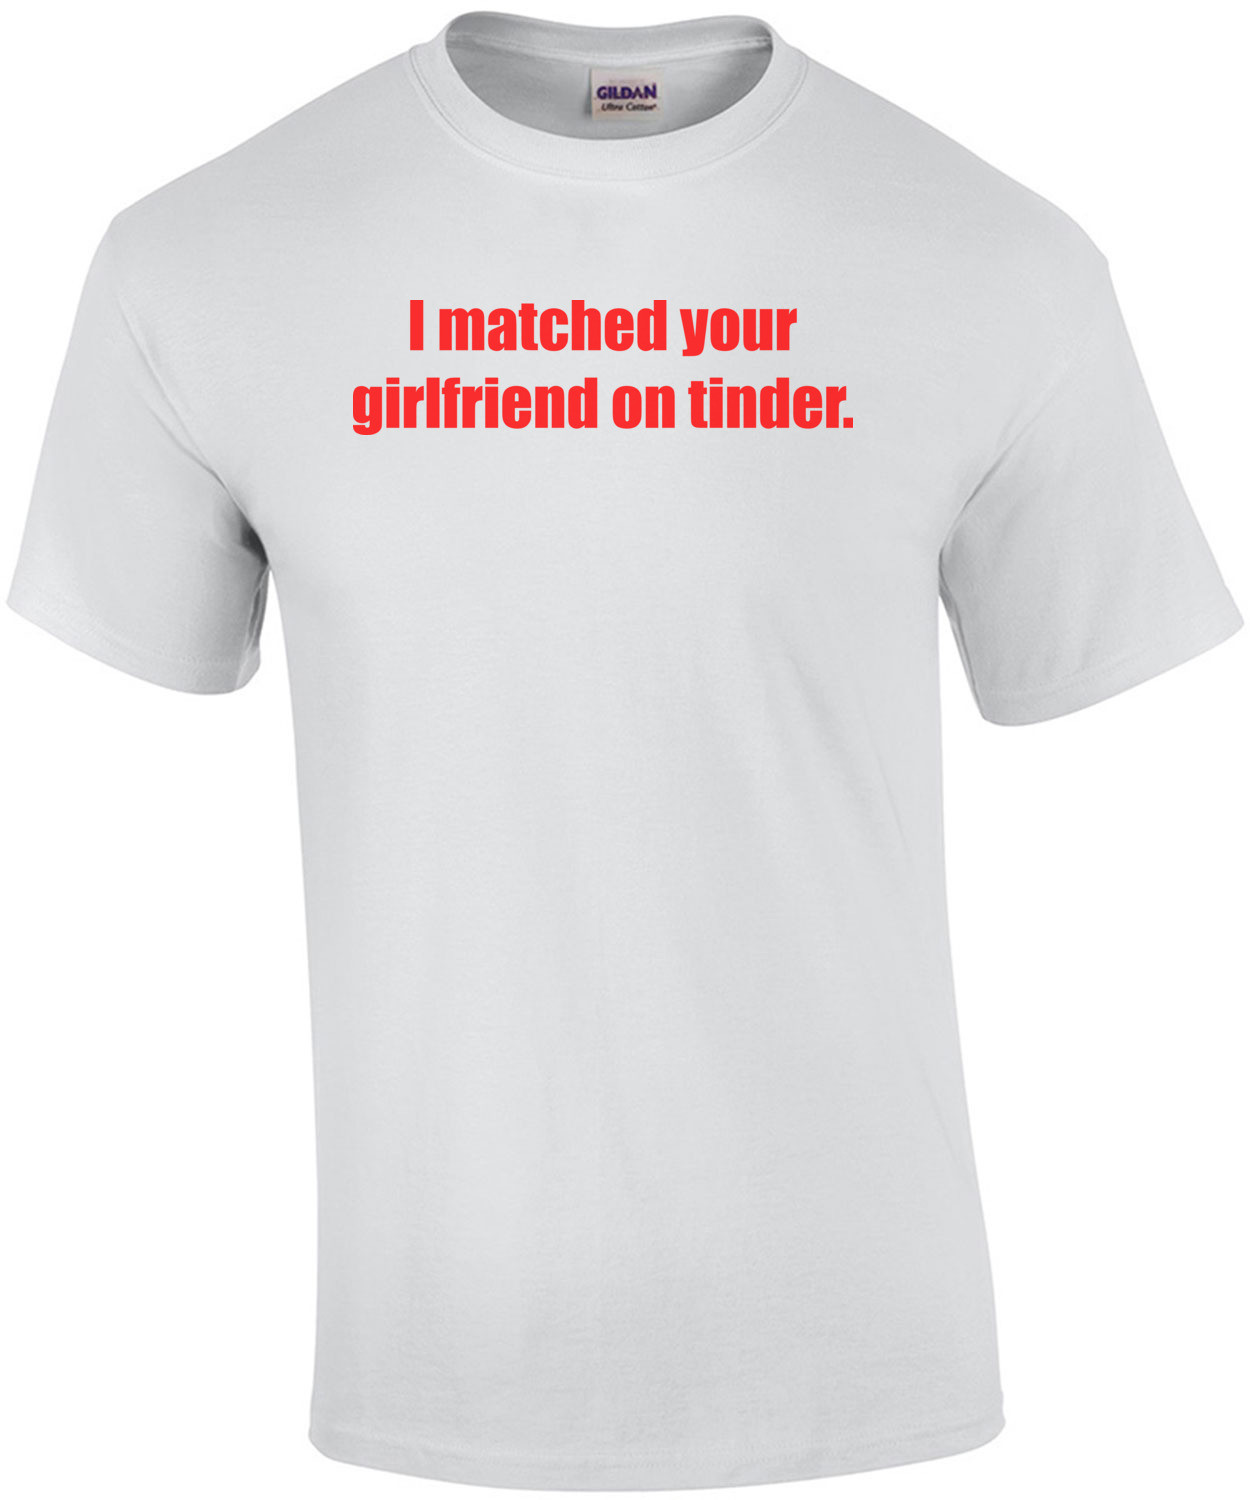 I matched your girlfriend on tinder. funny Shirt